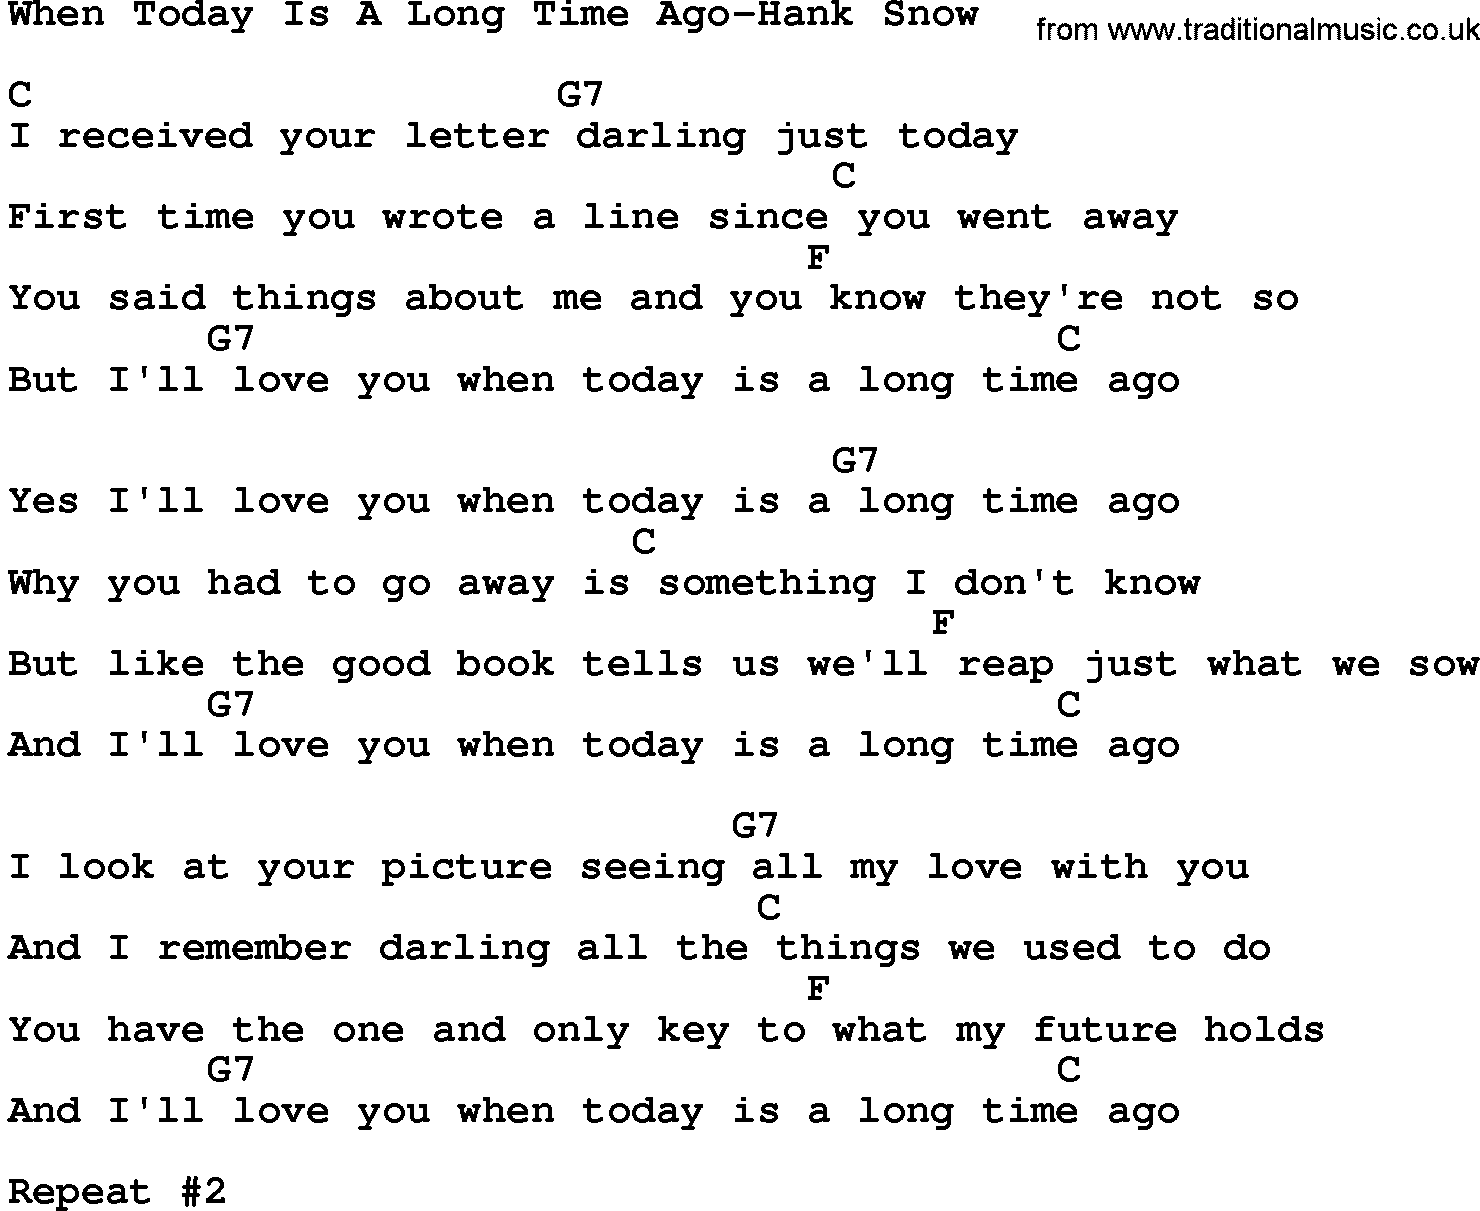 Country music song: When Today Is A Long Time Ago-Hank Snow lyrics and chords